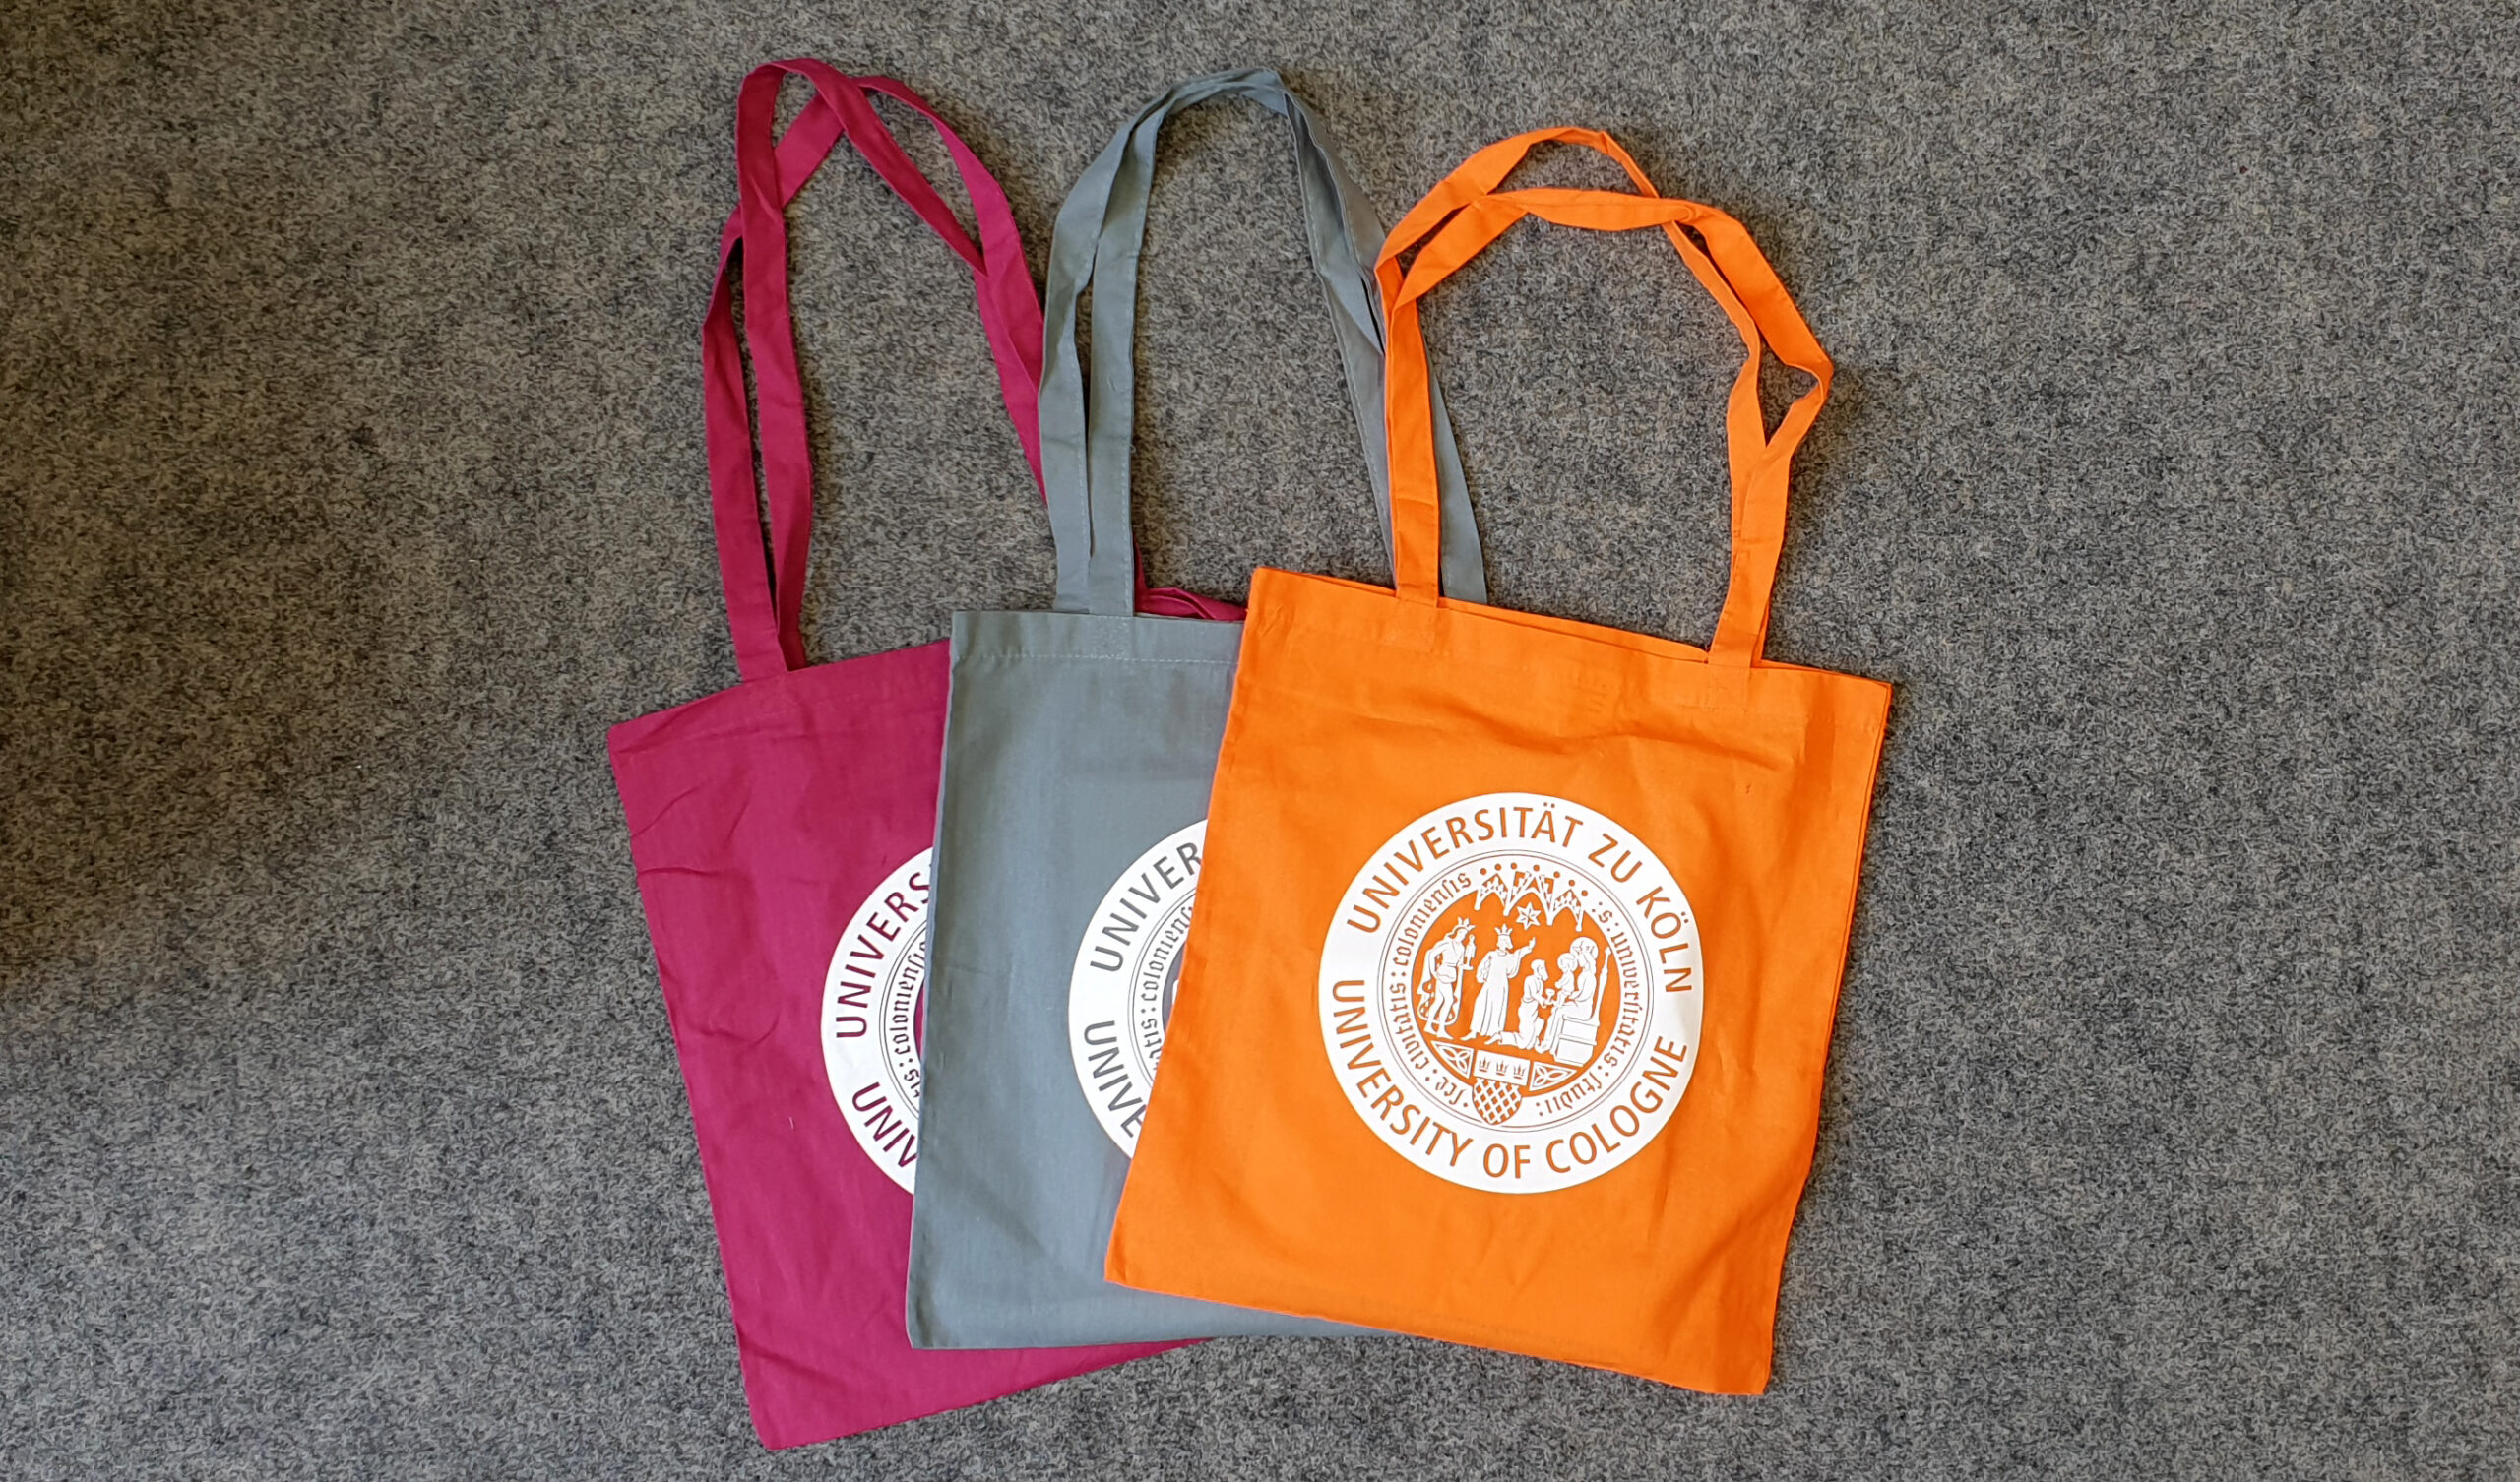 Thre bags with the emblem of the University of Cologne on them